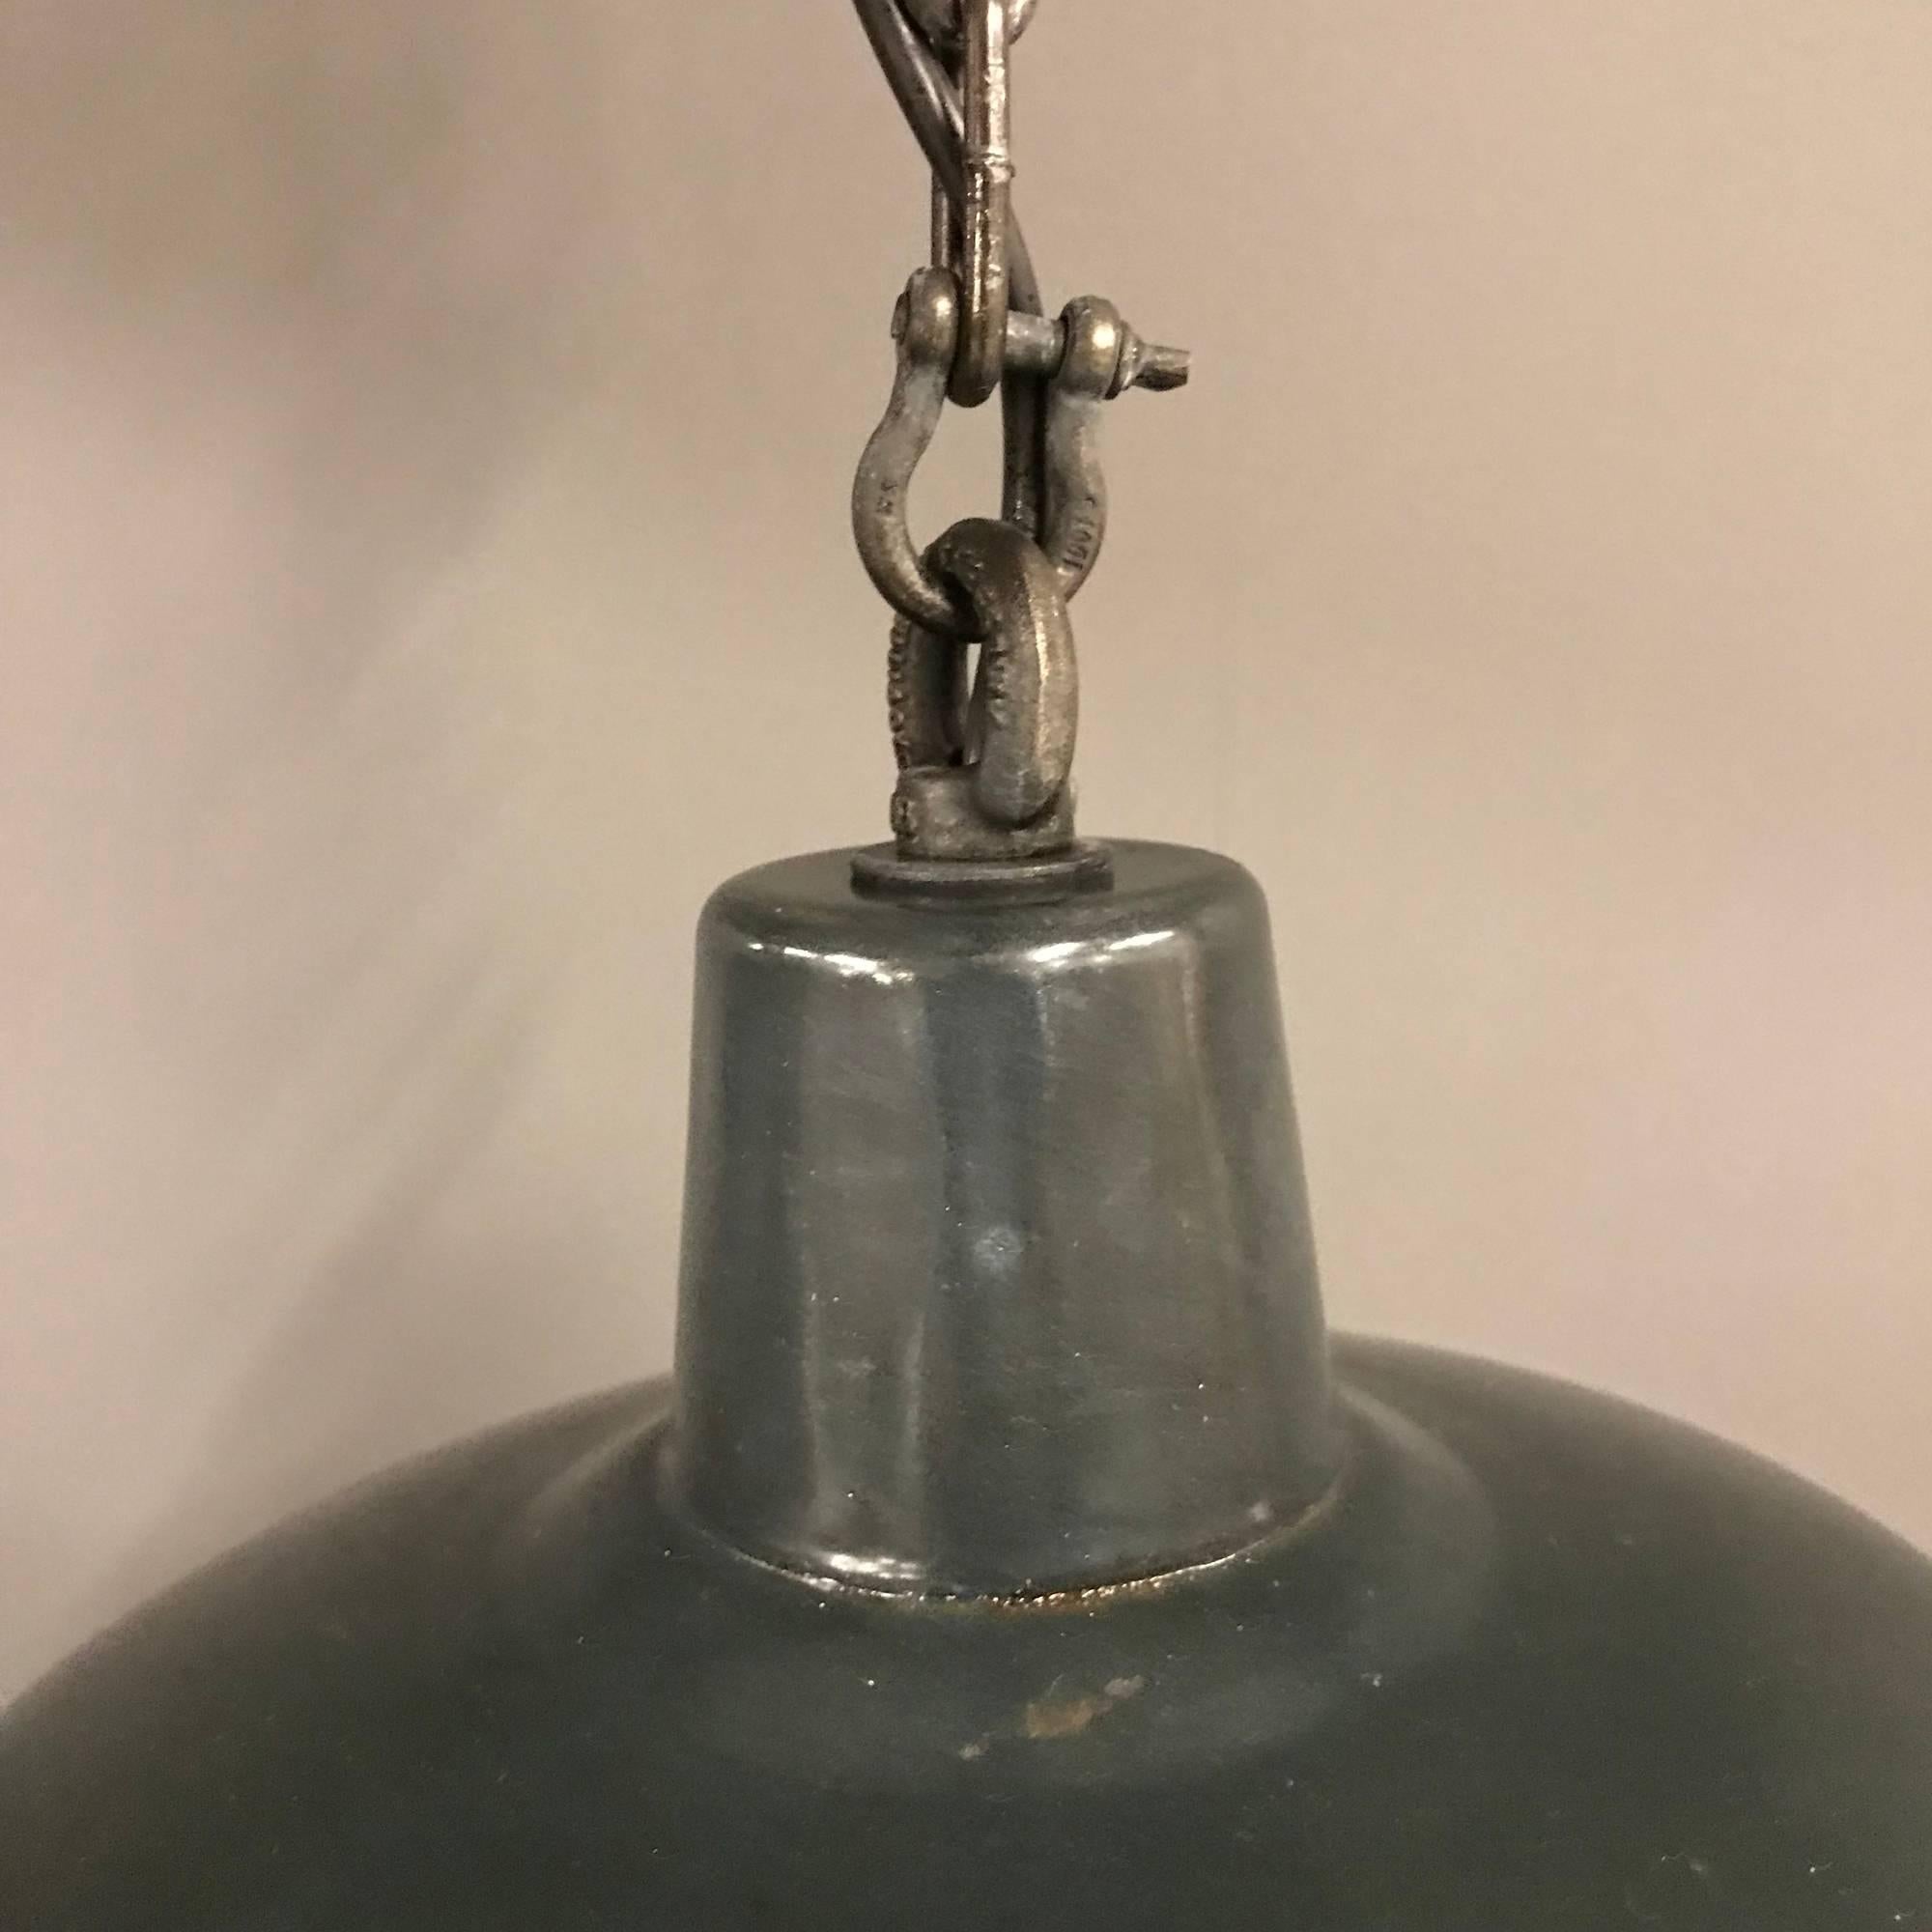 Black enamel factory pendant light. Have been restored and converted to E27 with an porcelain socket. Comes with an 100cm long patinated chain. Shade is slightly bent.
Size of this one-piece small black enamel factory pendant light
Measures: 32 x